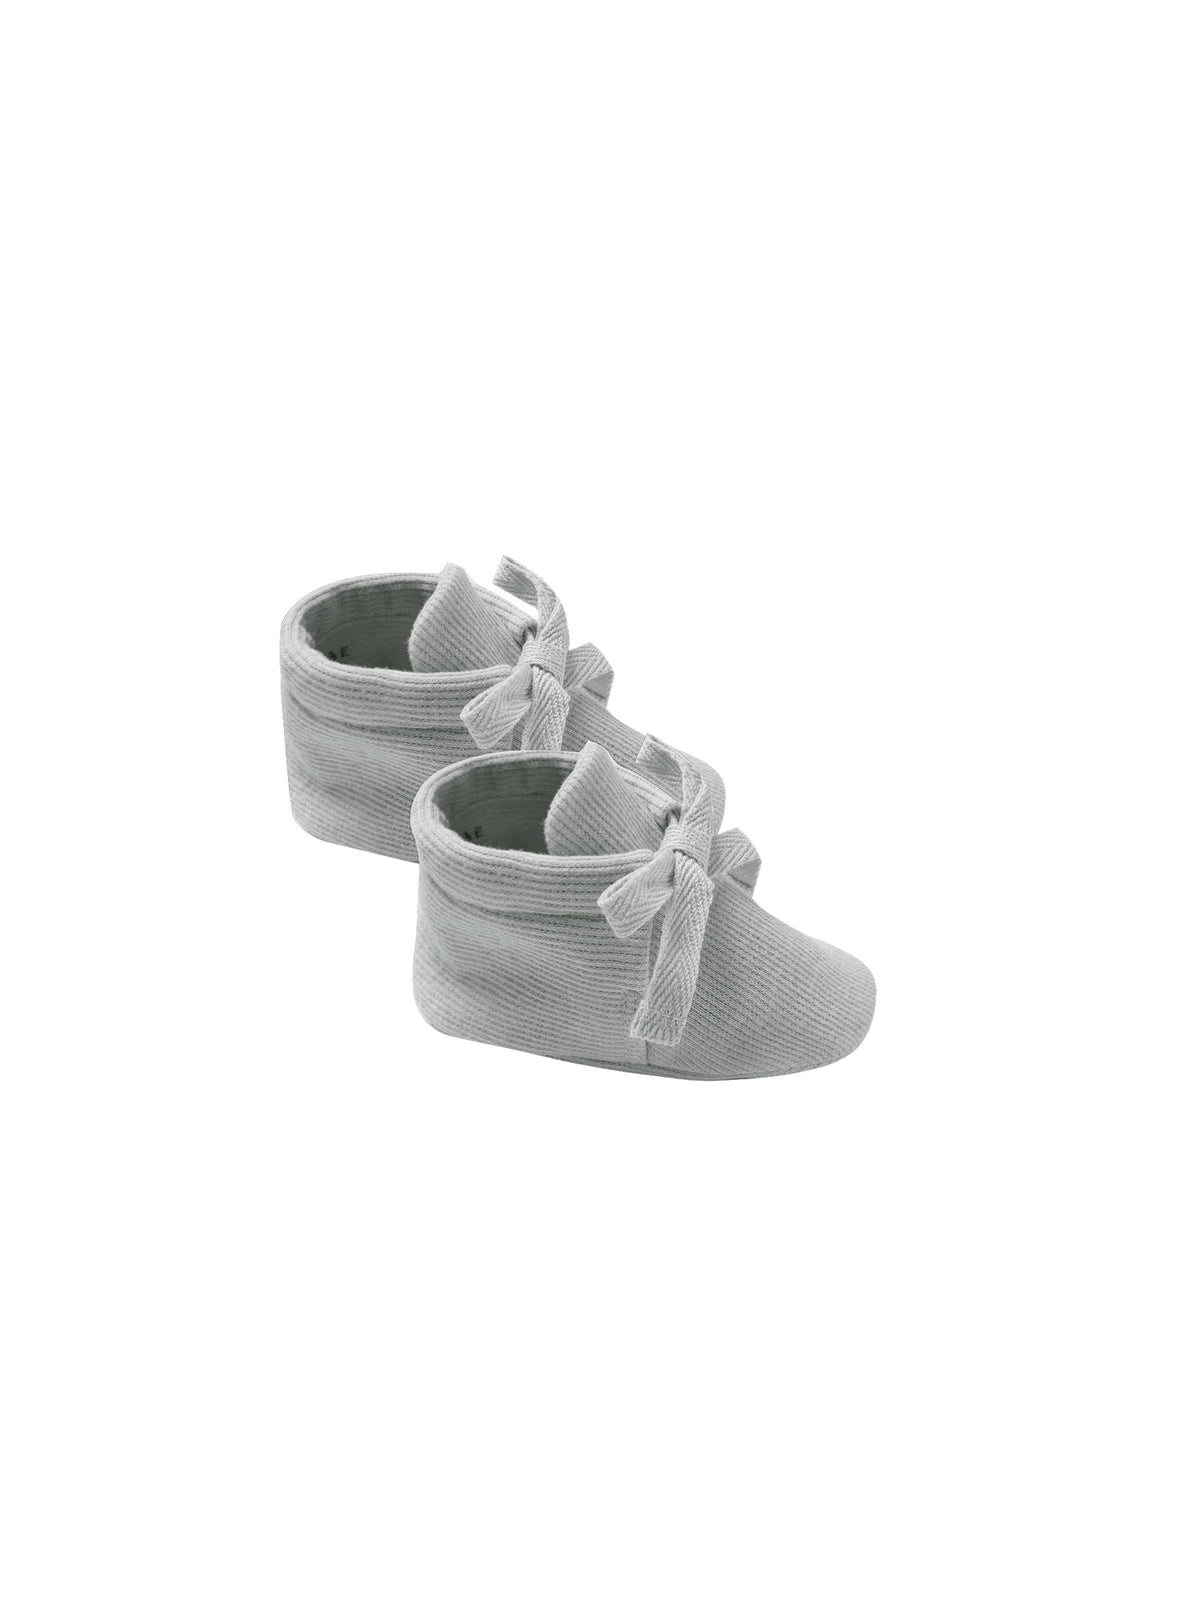 Baby Booties - Sky - Child Boutique